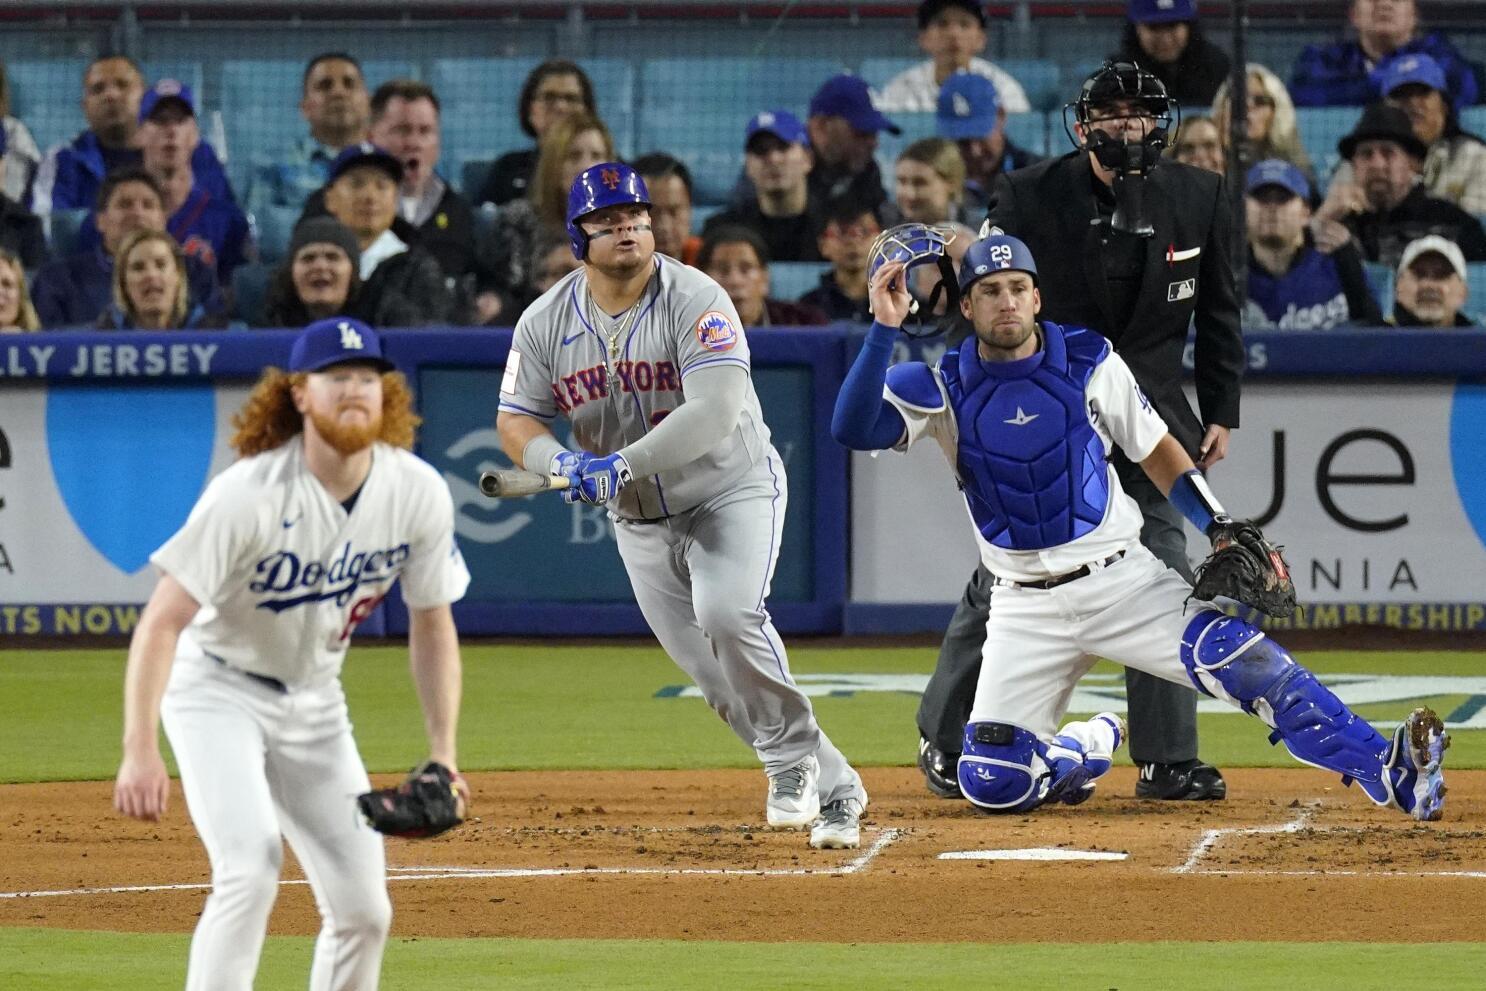 Vogelbach, Baty lead Mets past Dodgers 8-6 for 5th straight